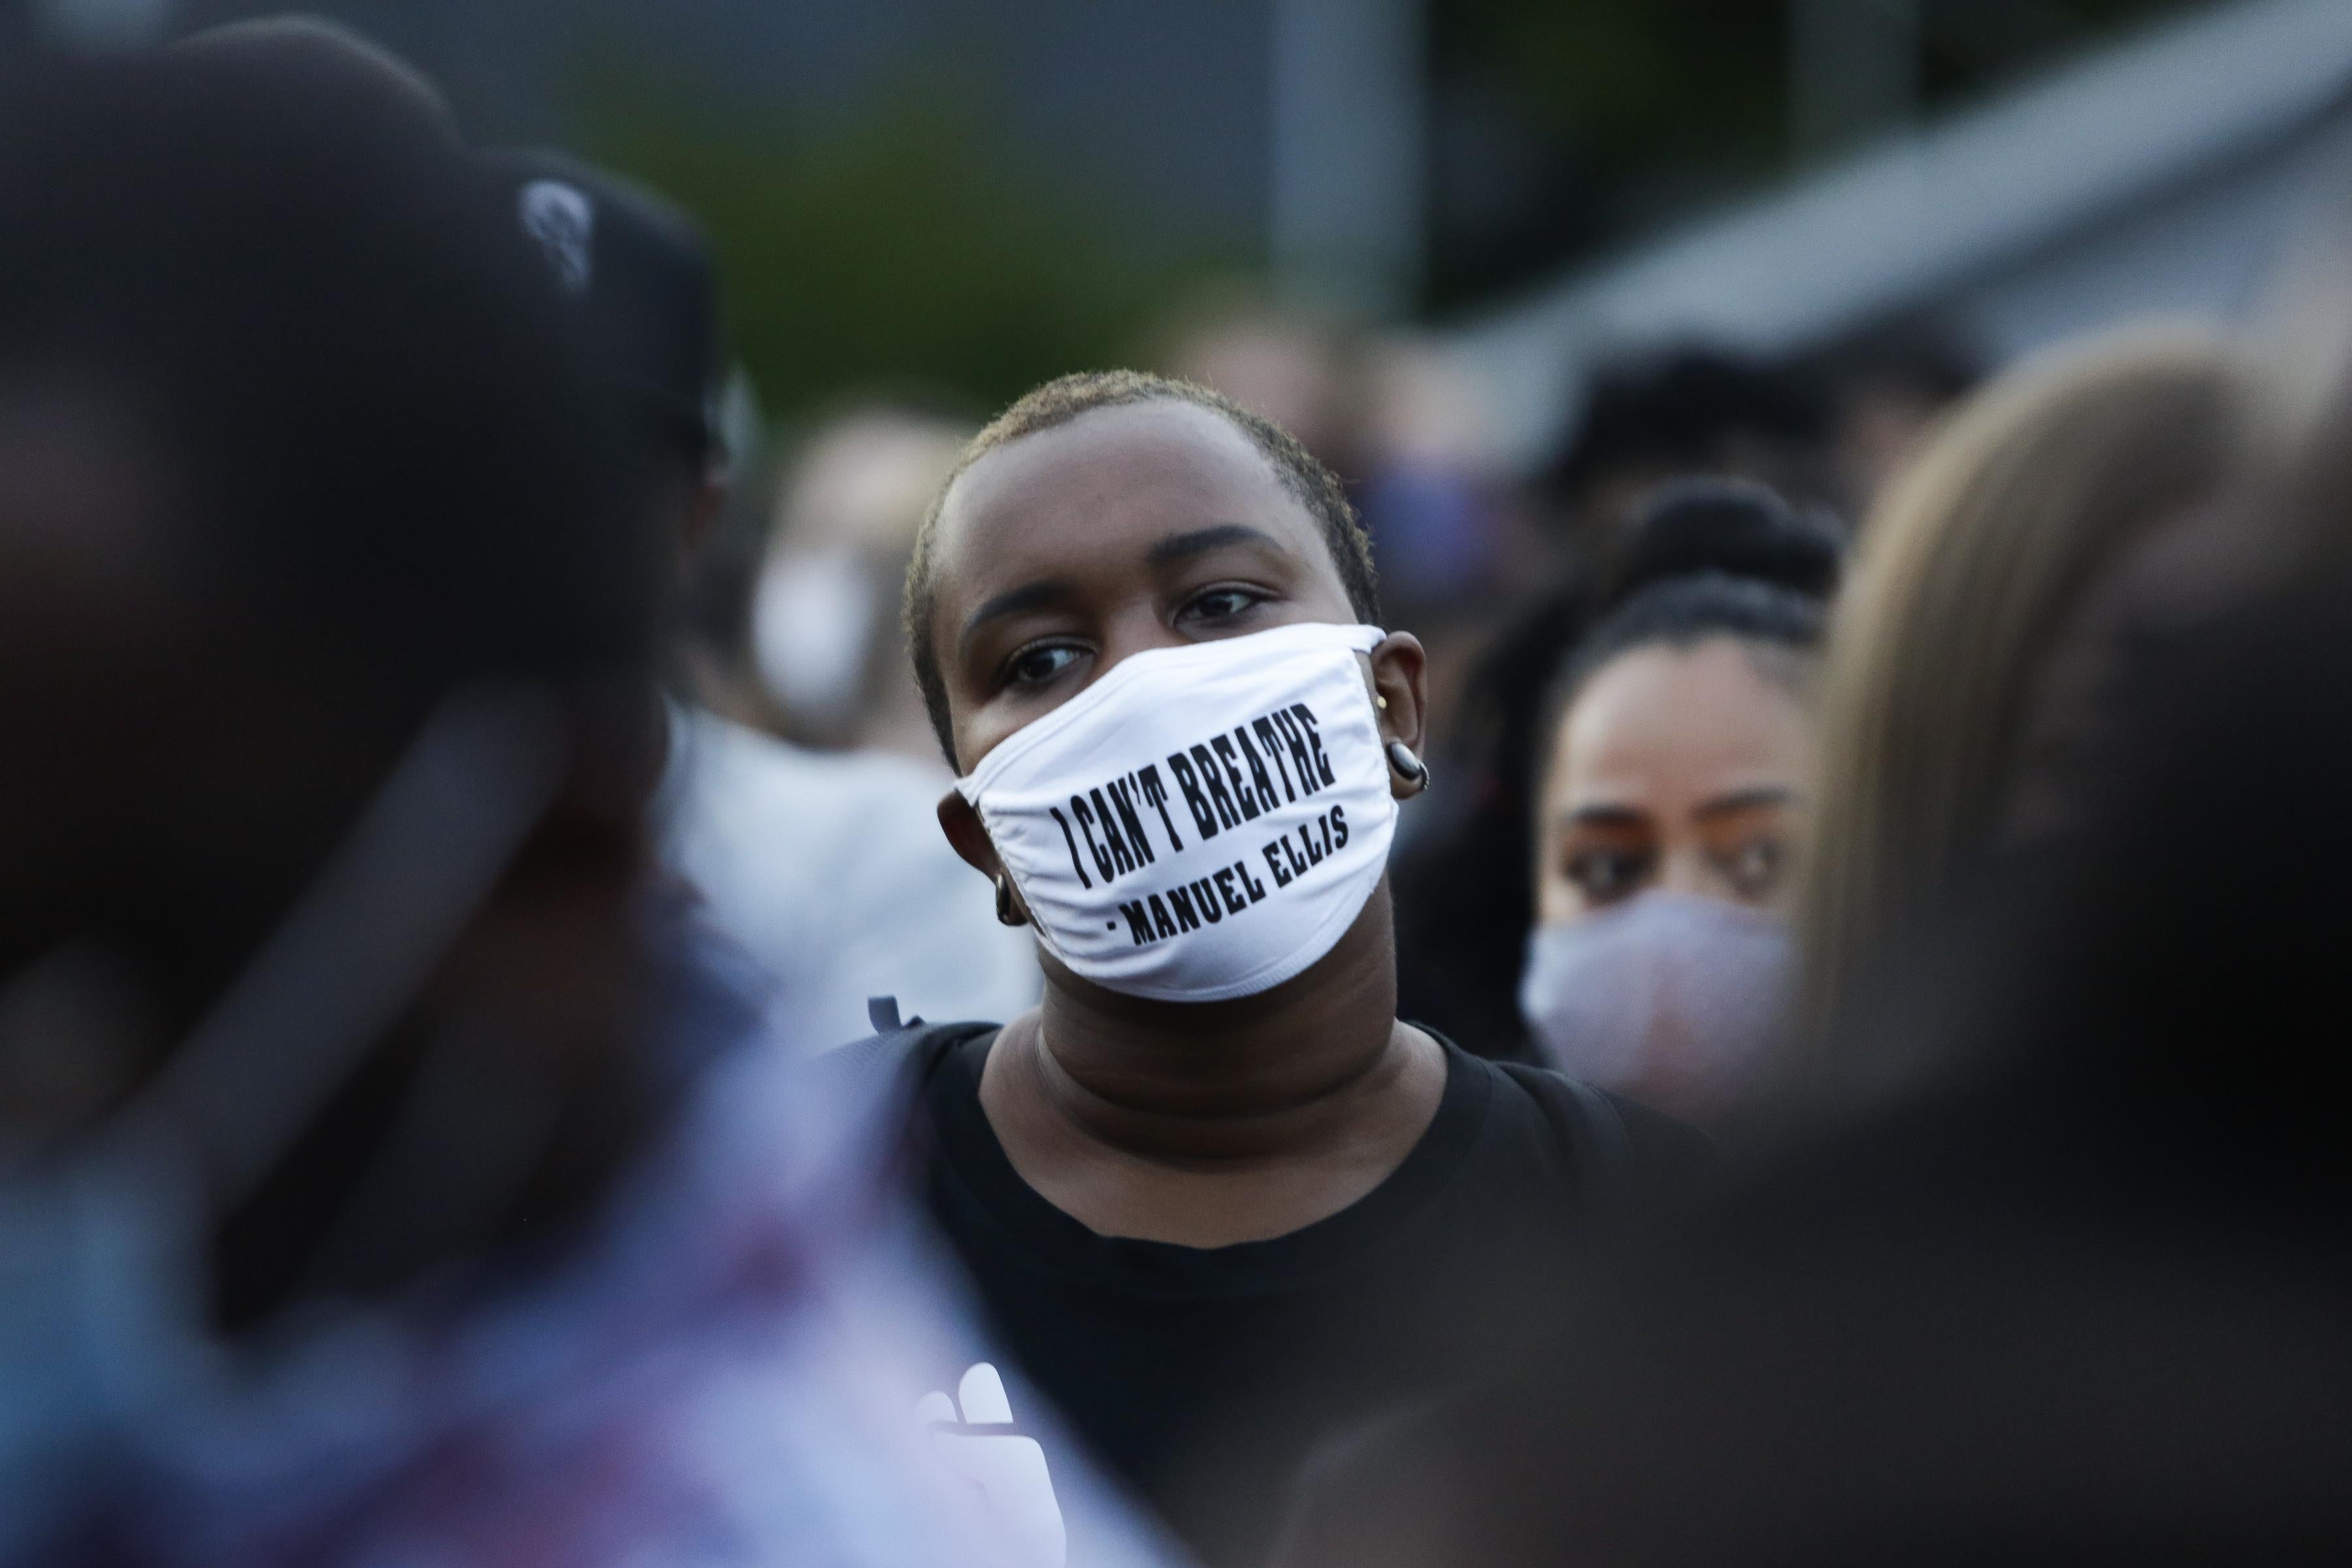 A man in a crowd wears a mask that says "I can't breathe."